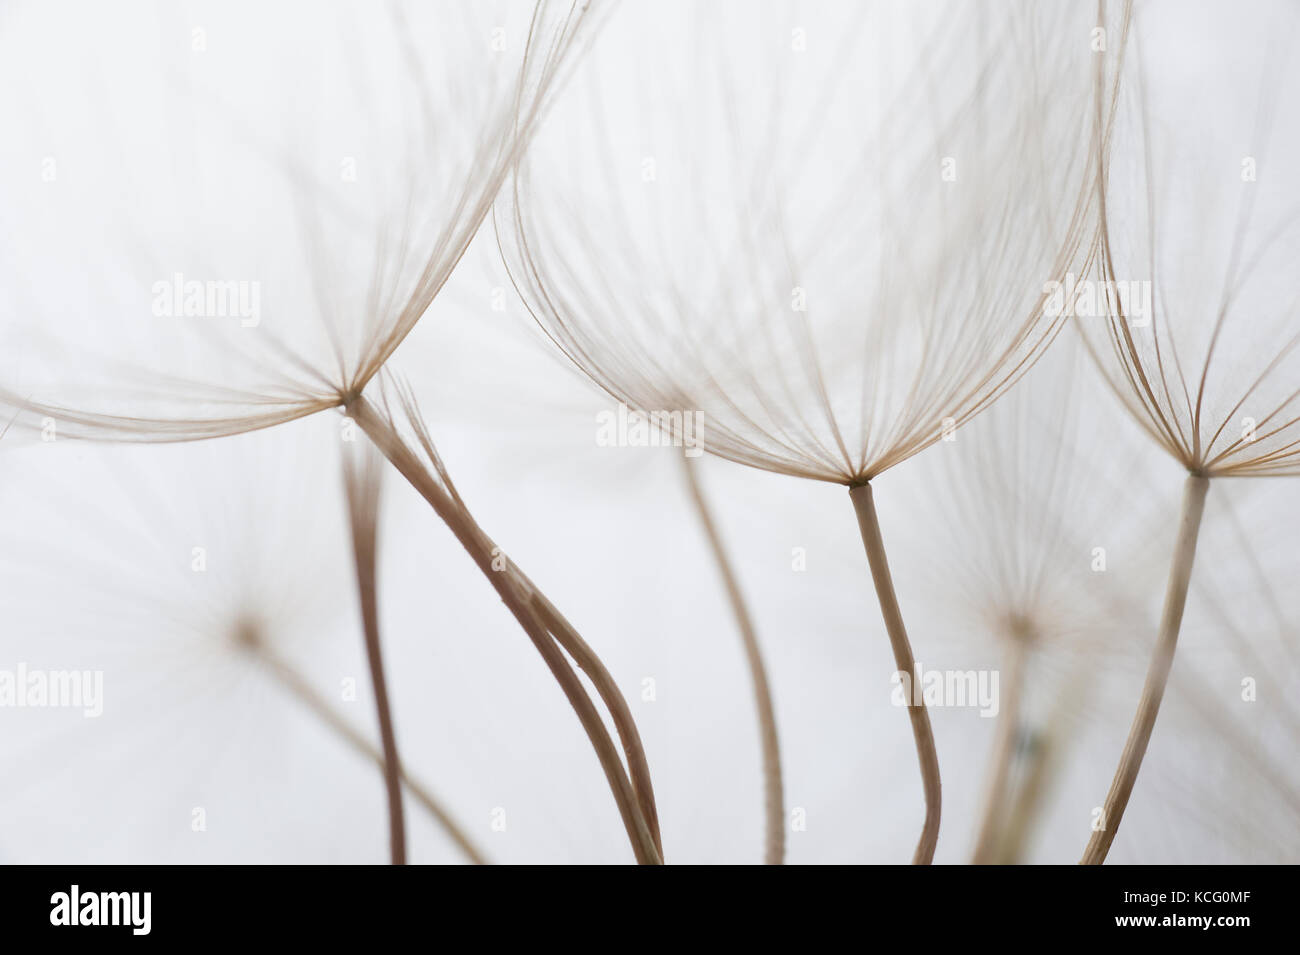 Close up macro image of dandelion seed heads with detailed lace-like patterns and soft focus effect. Stock Photo